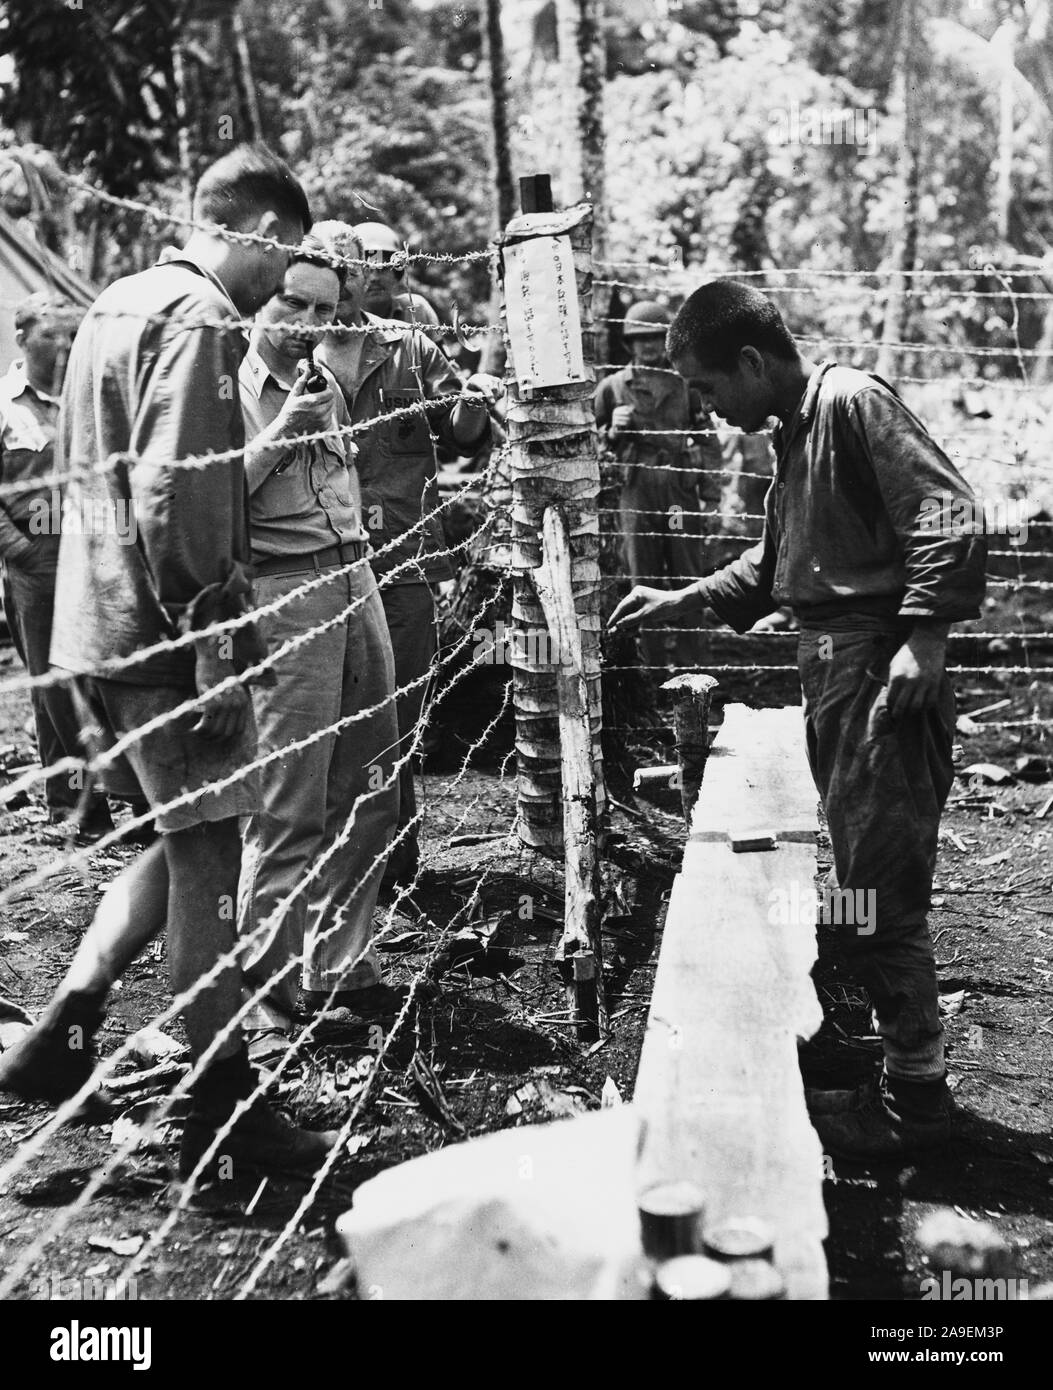 Marine intelligence officers of the Marine Second Division question prisoner capture by Marines 6th division. South Pacific theater of war. Stock Photo